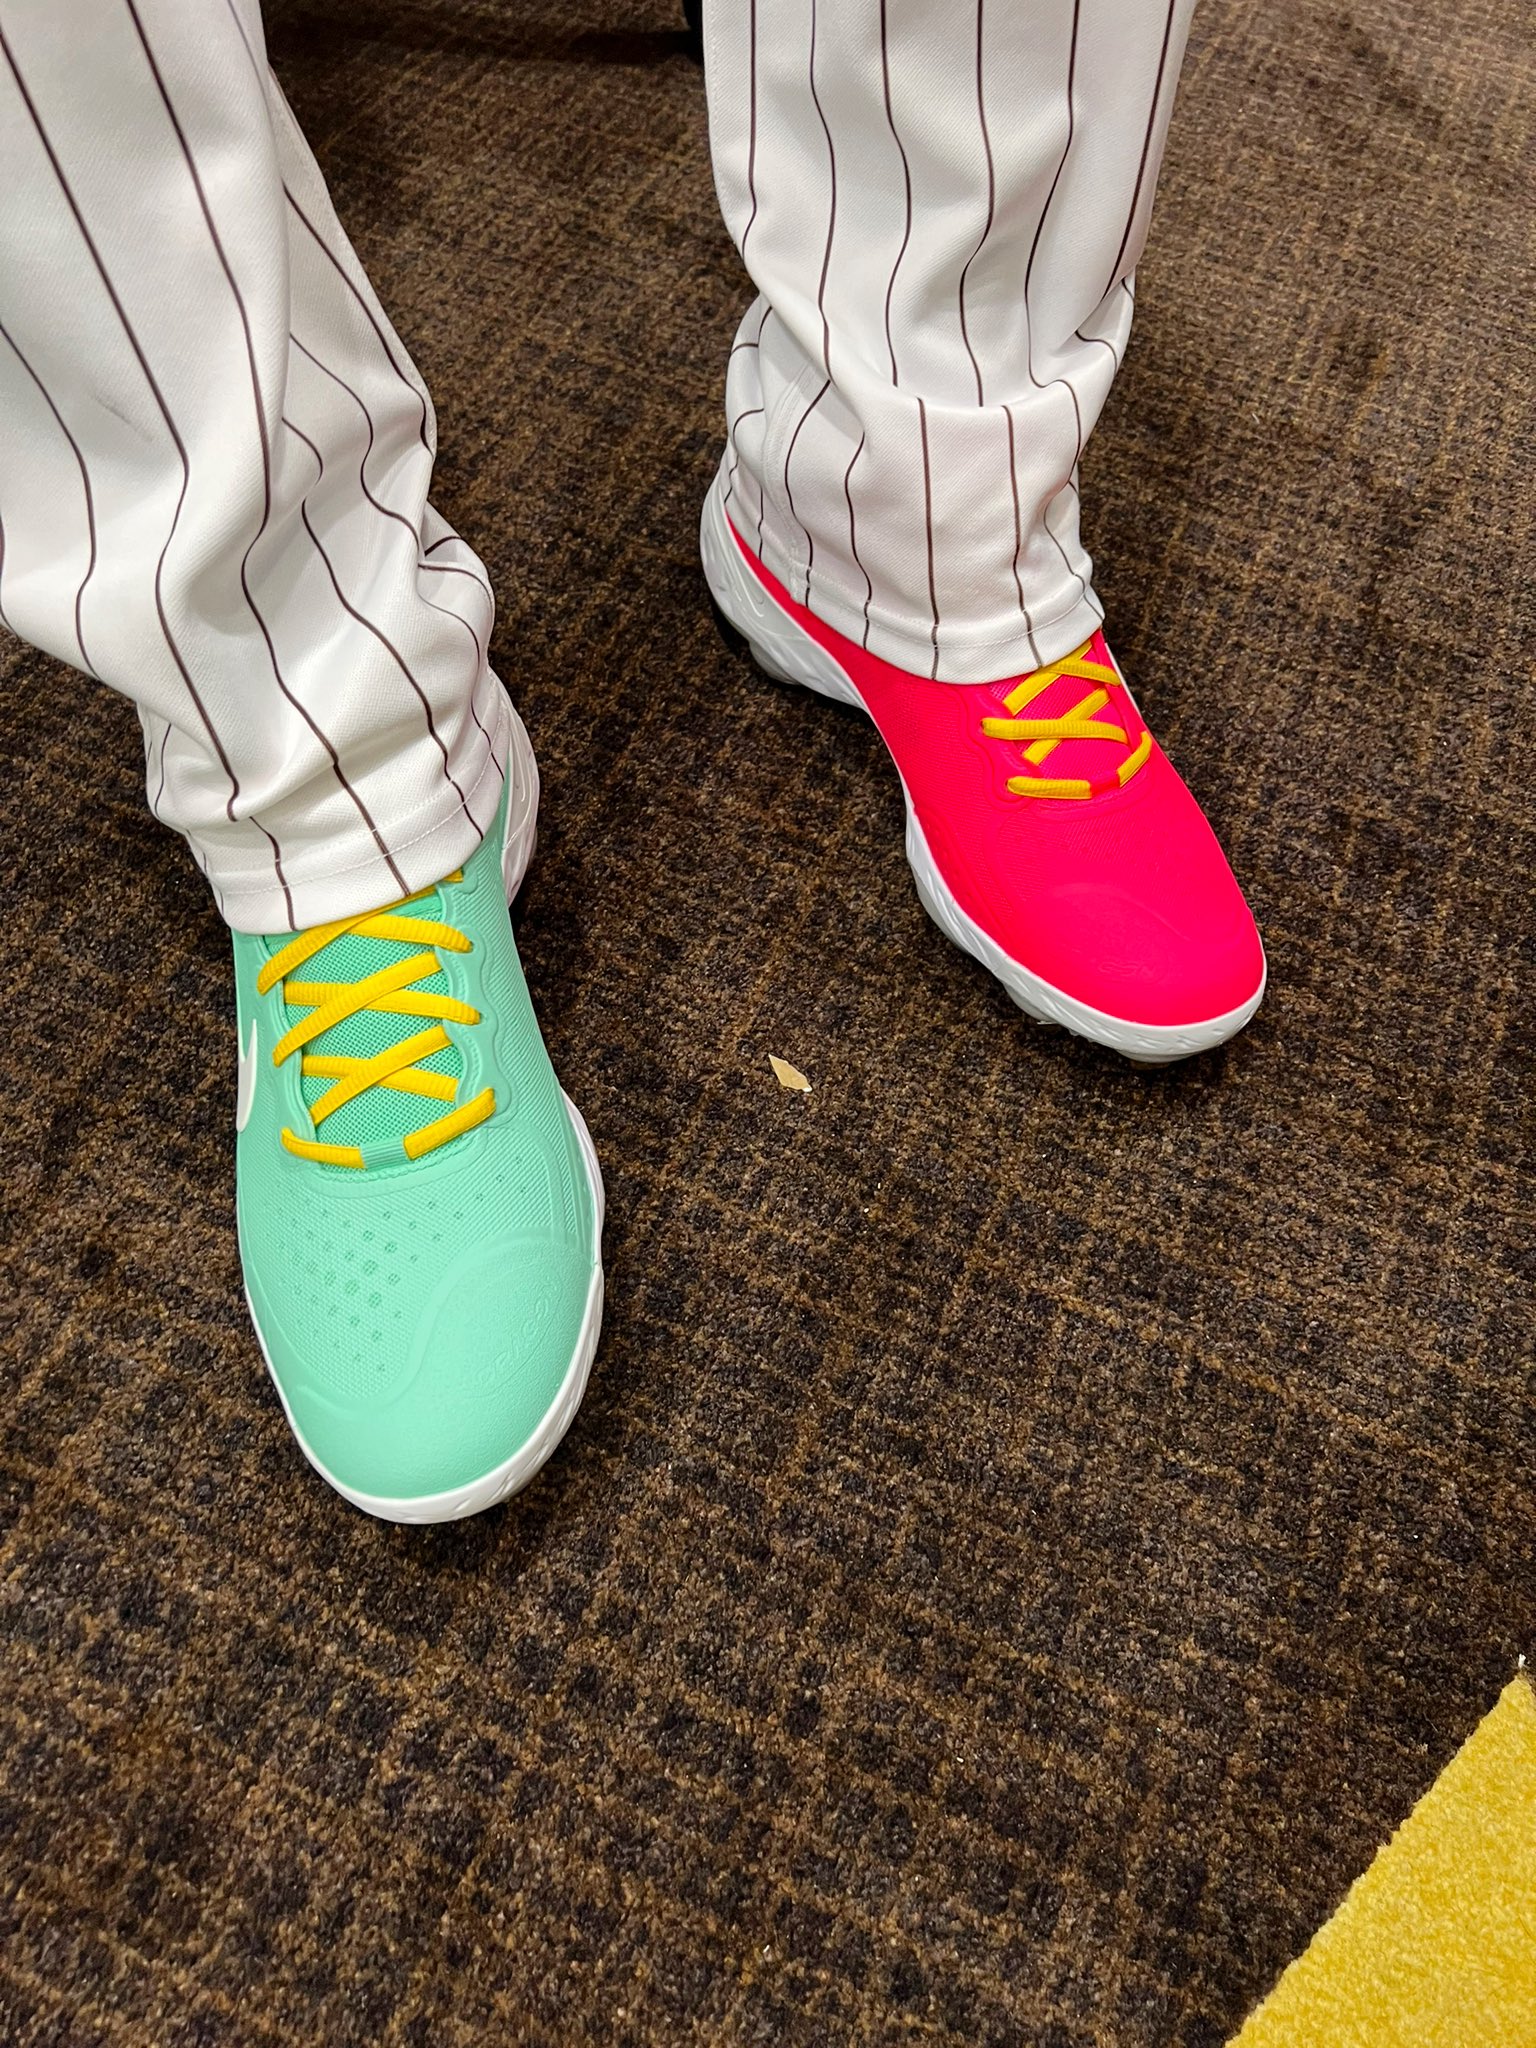 Annie Heilbrunn on X: Blake Snell will be the starting pitcher tomorrow  for the #Padres, the first time the team will be wearing their City Connect  uniforms. Here's the cleats he'll be